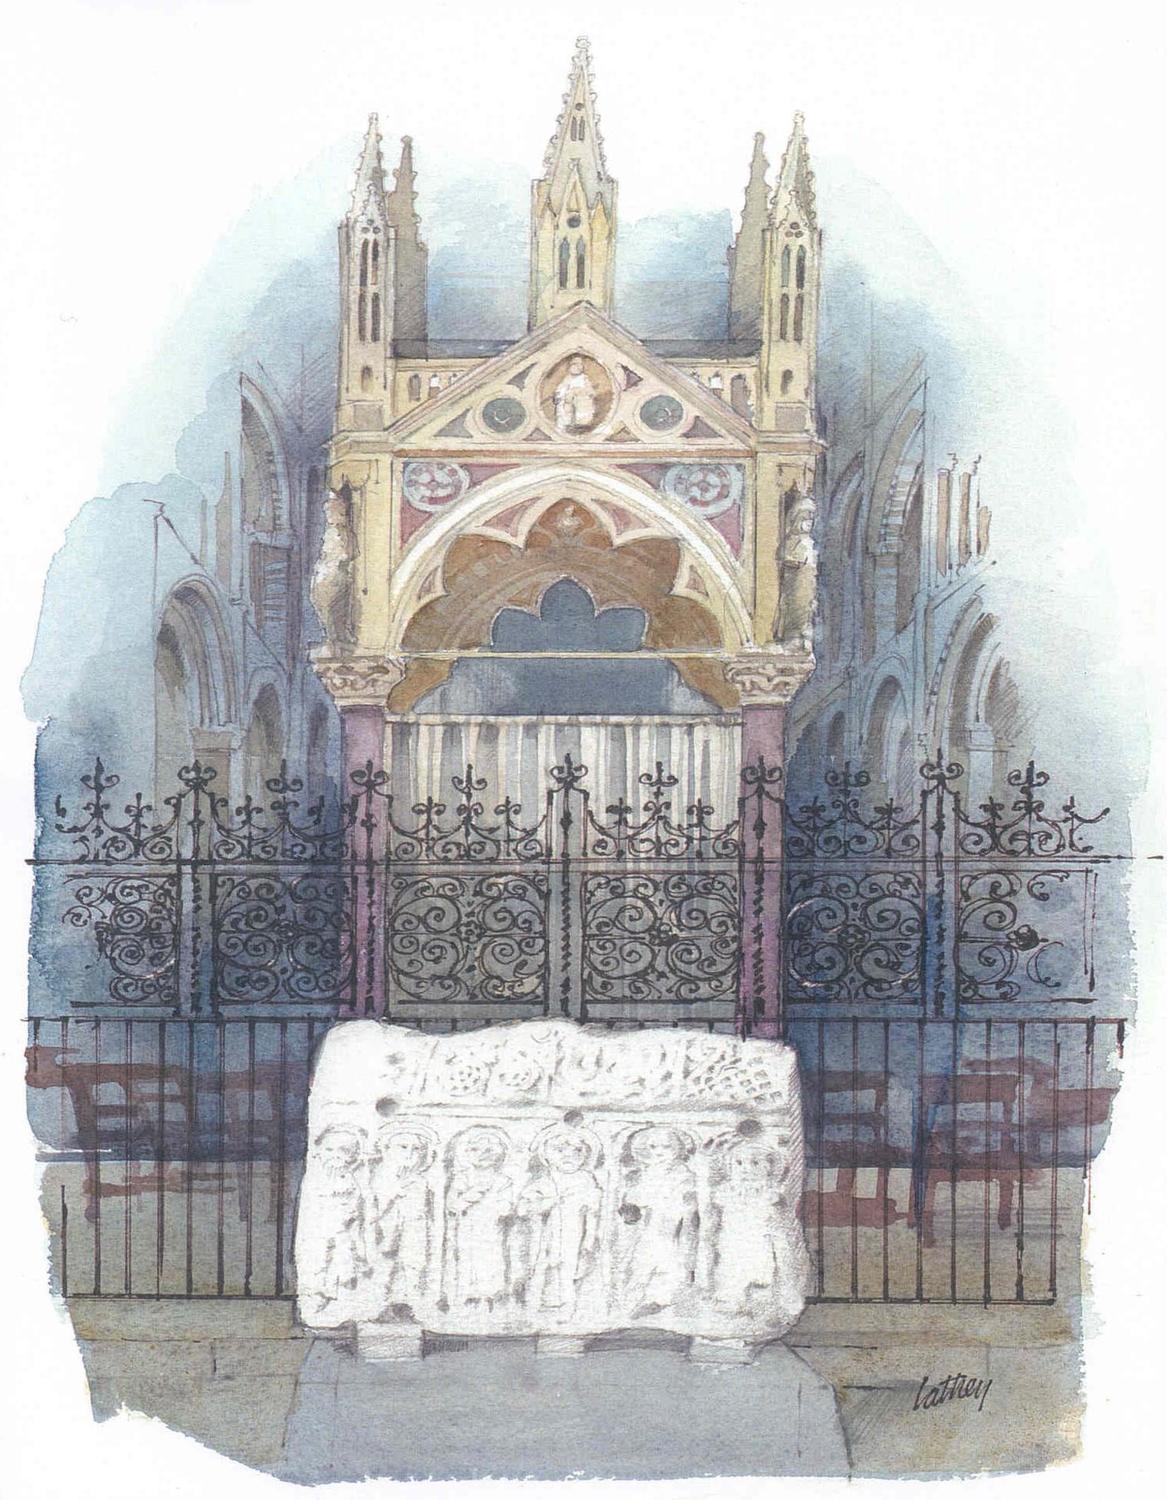 A watercolour painting depicting a view inside Peterborough Cathedral. The Hedda stone can be seen in the foreground, with high altar in background, separated by an ornate barrier.